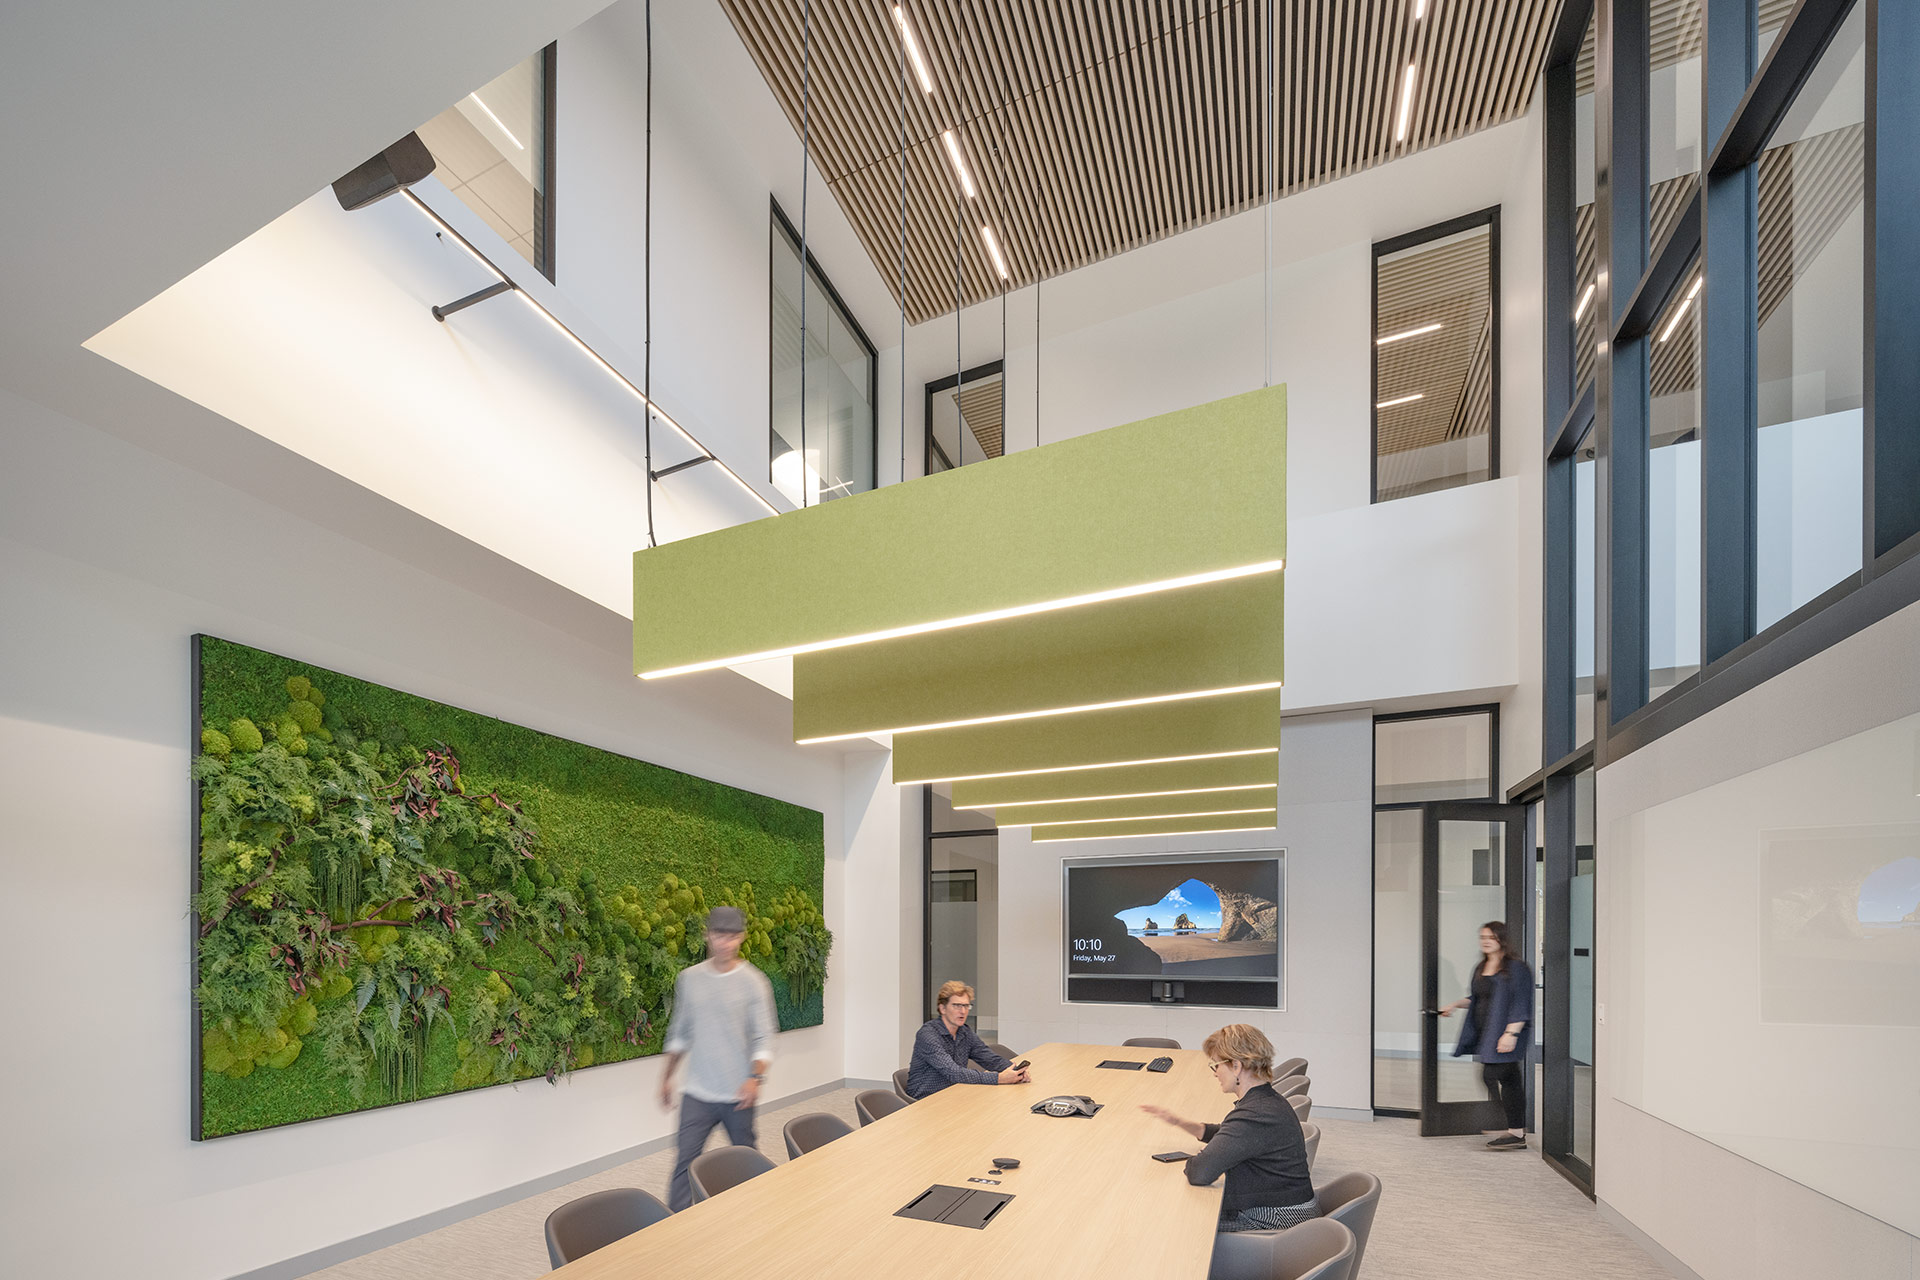 Interior at Takara Bio life science facility, large double height conference room with large biophilia green wall feature